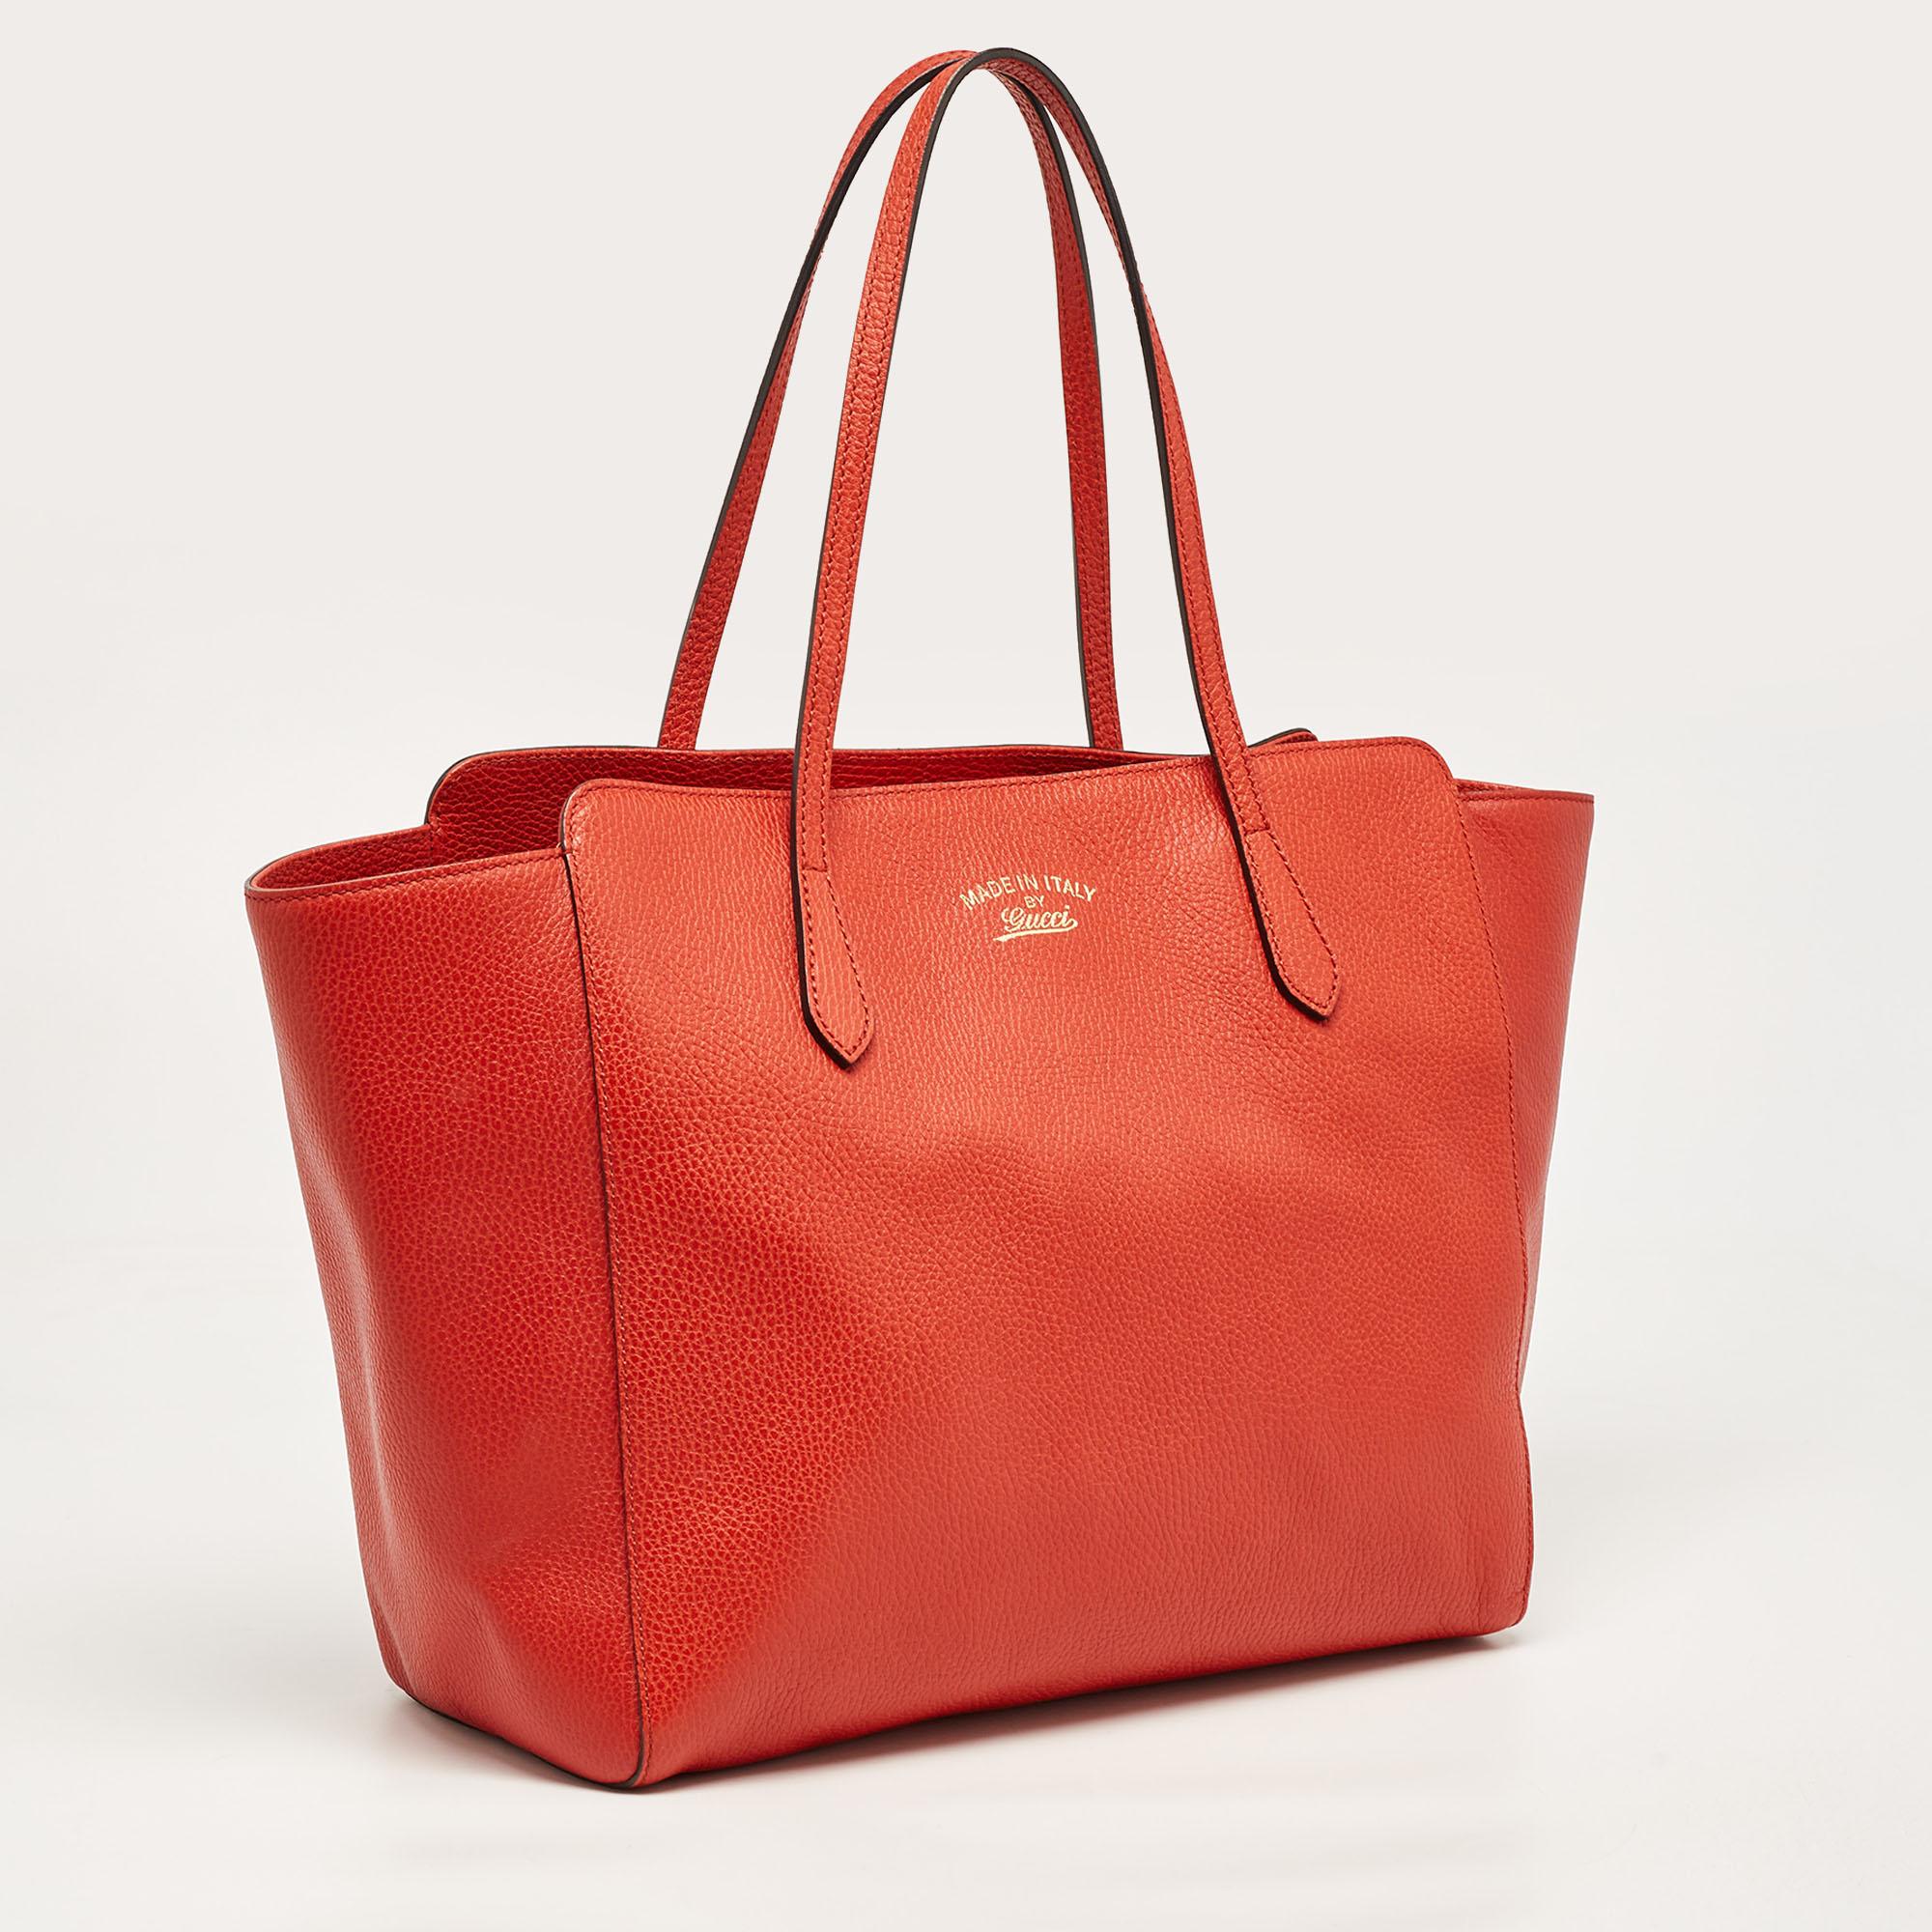  Gucci Red Leather Medium Swing Tote 6